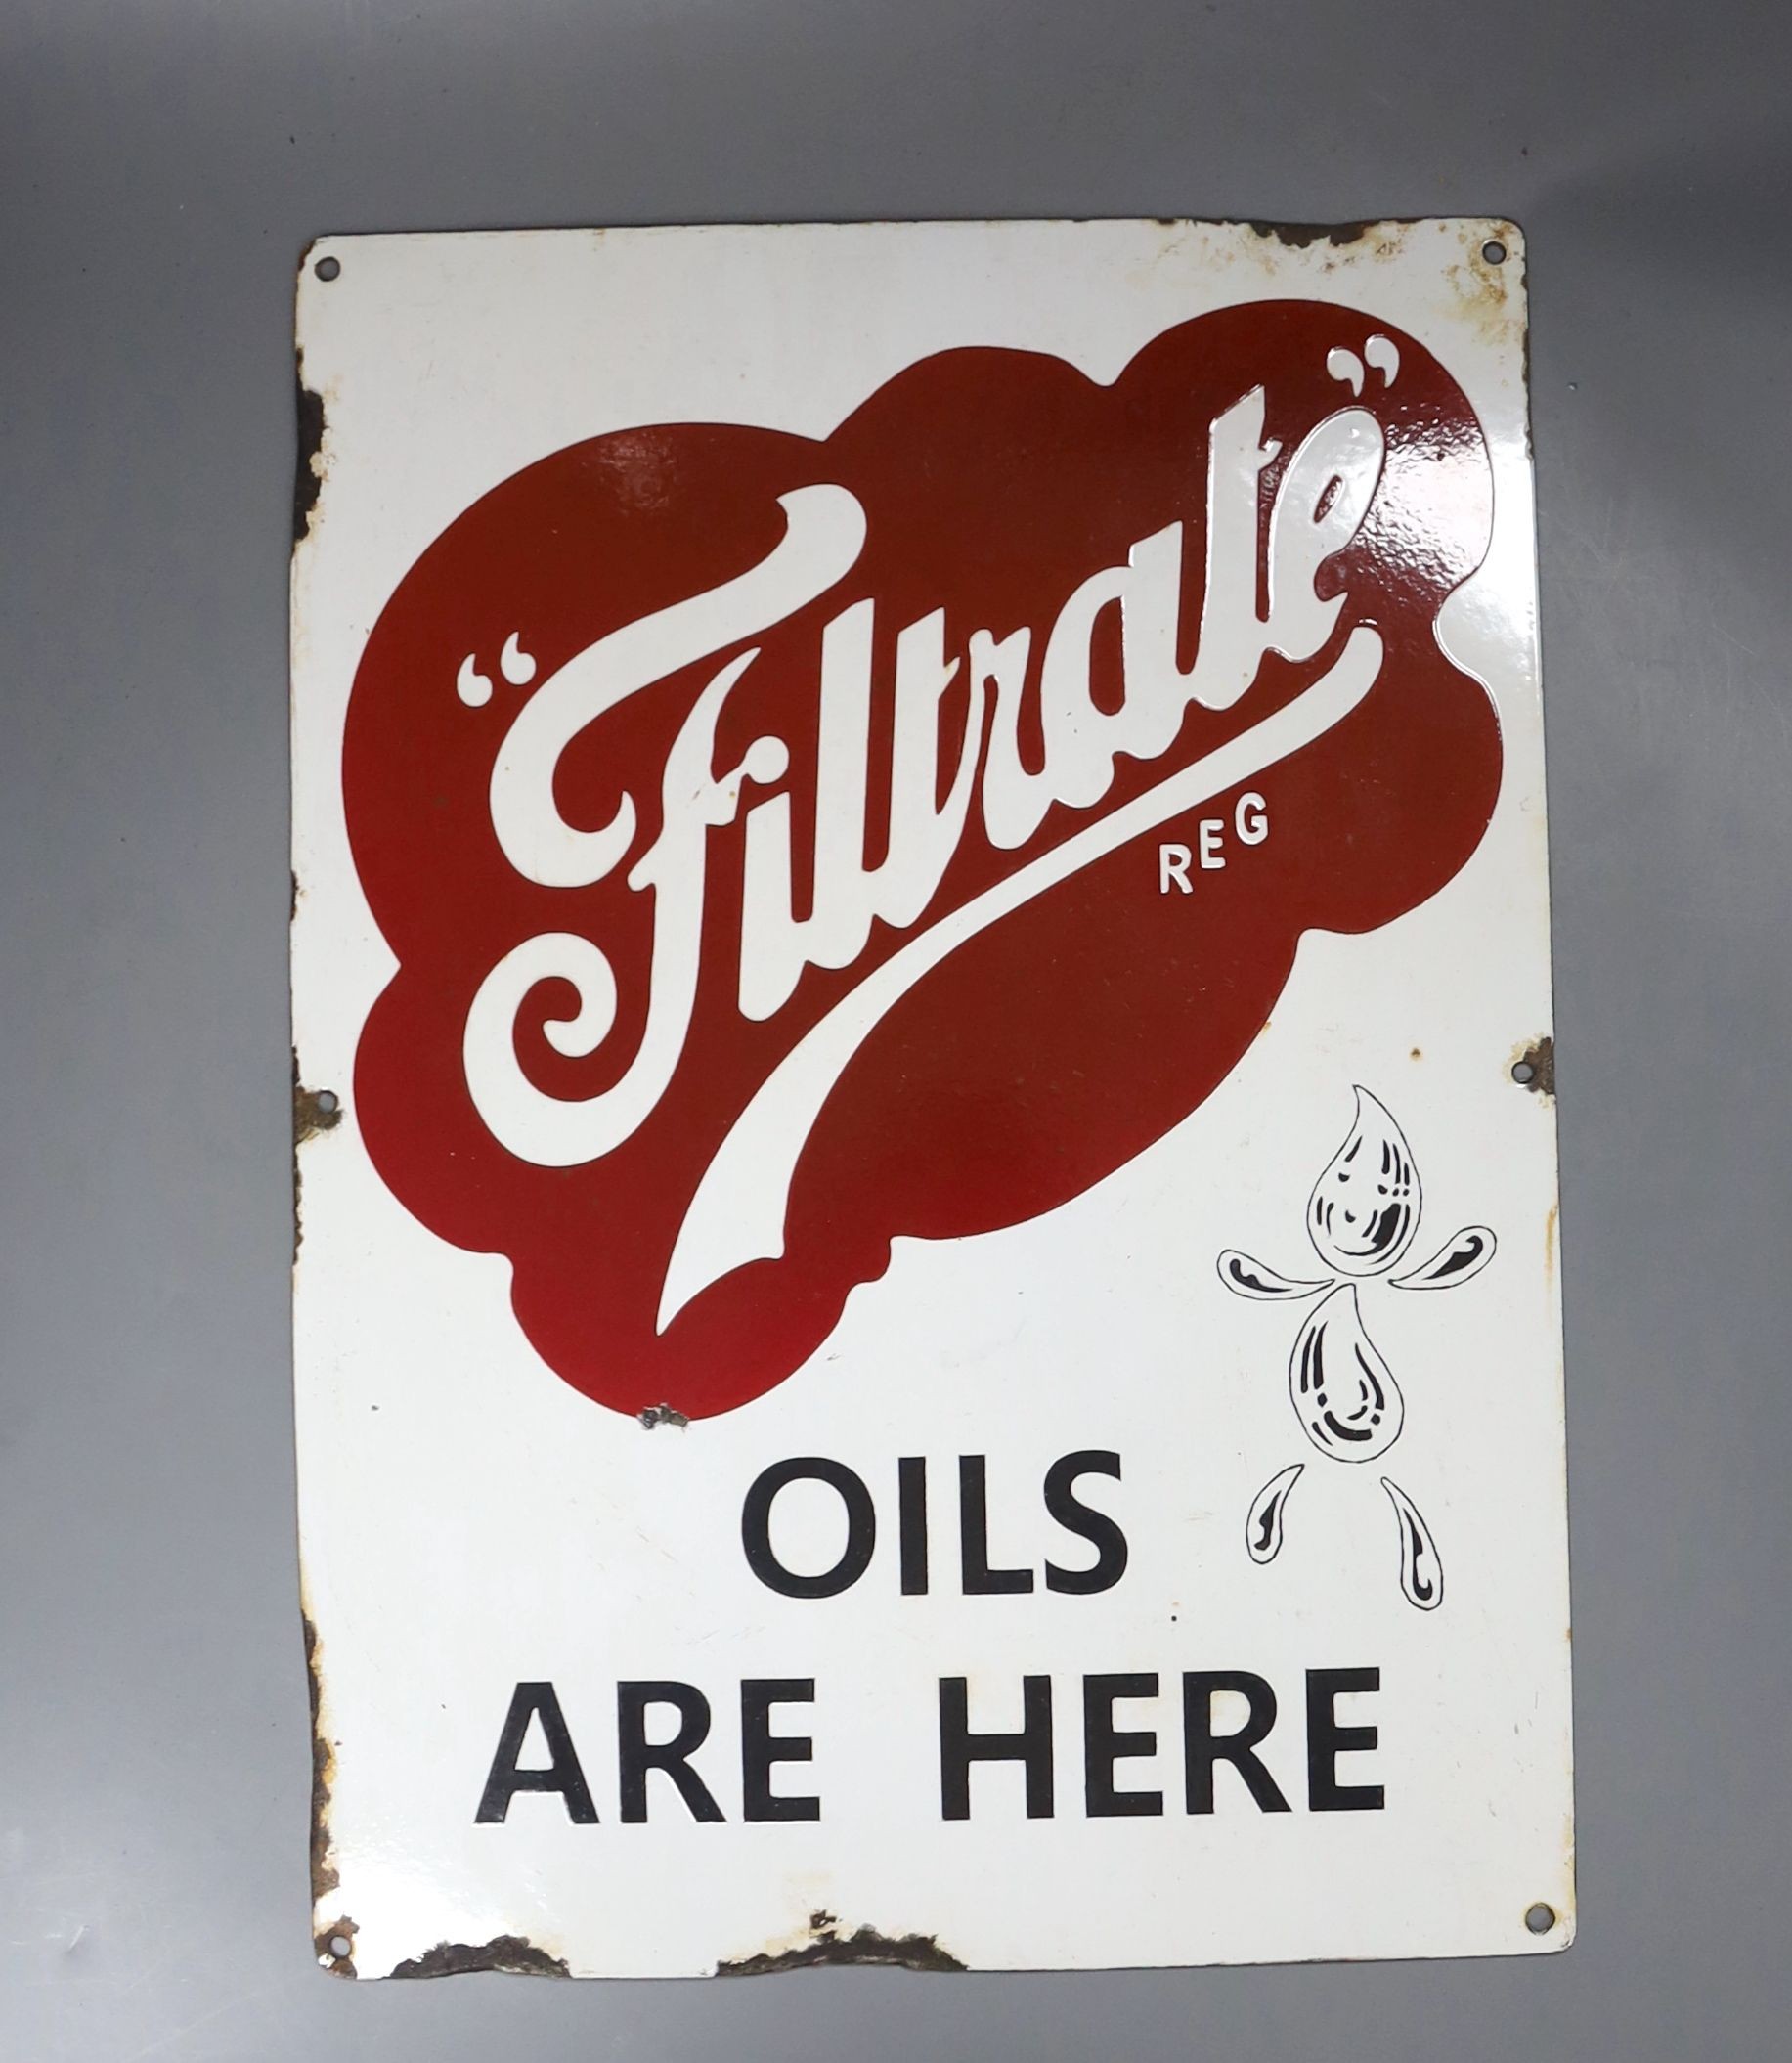 Filtrate, Oils Are Here enamelled sign, 43 x 31cm